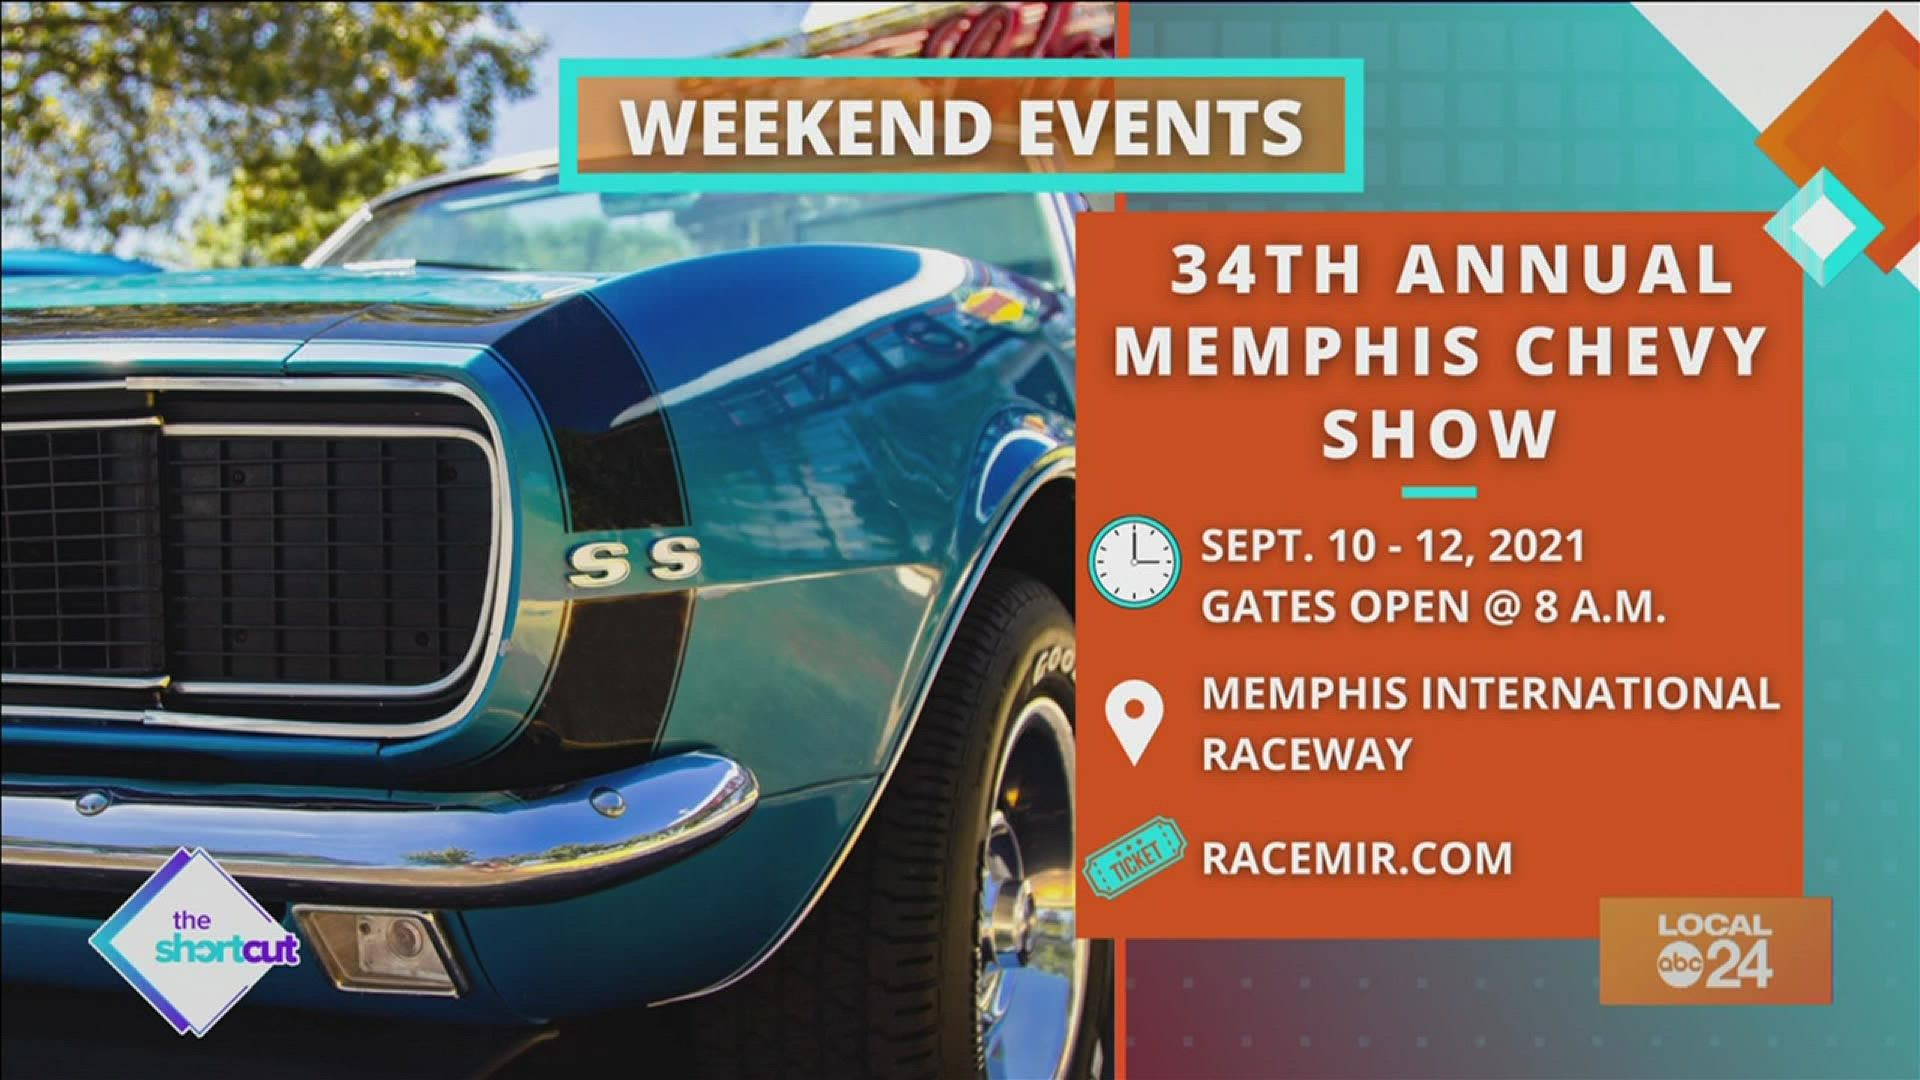 From Chevy shows to comedy shows to yoga festivals, check out all of the fun September 2021 Memphis weekend events right here on "The Shortcut!"